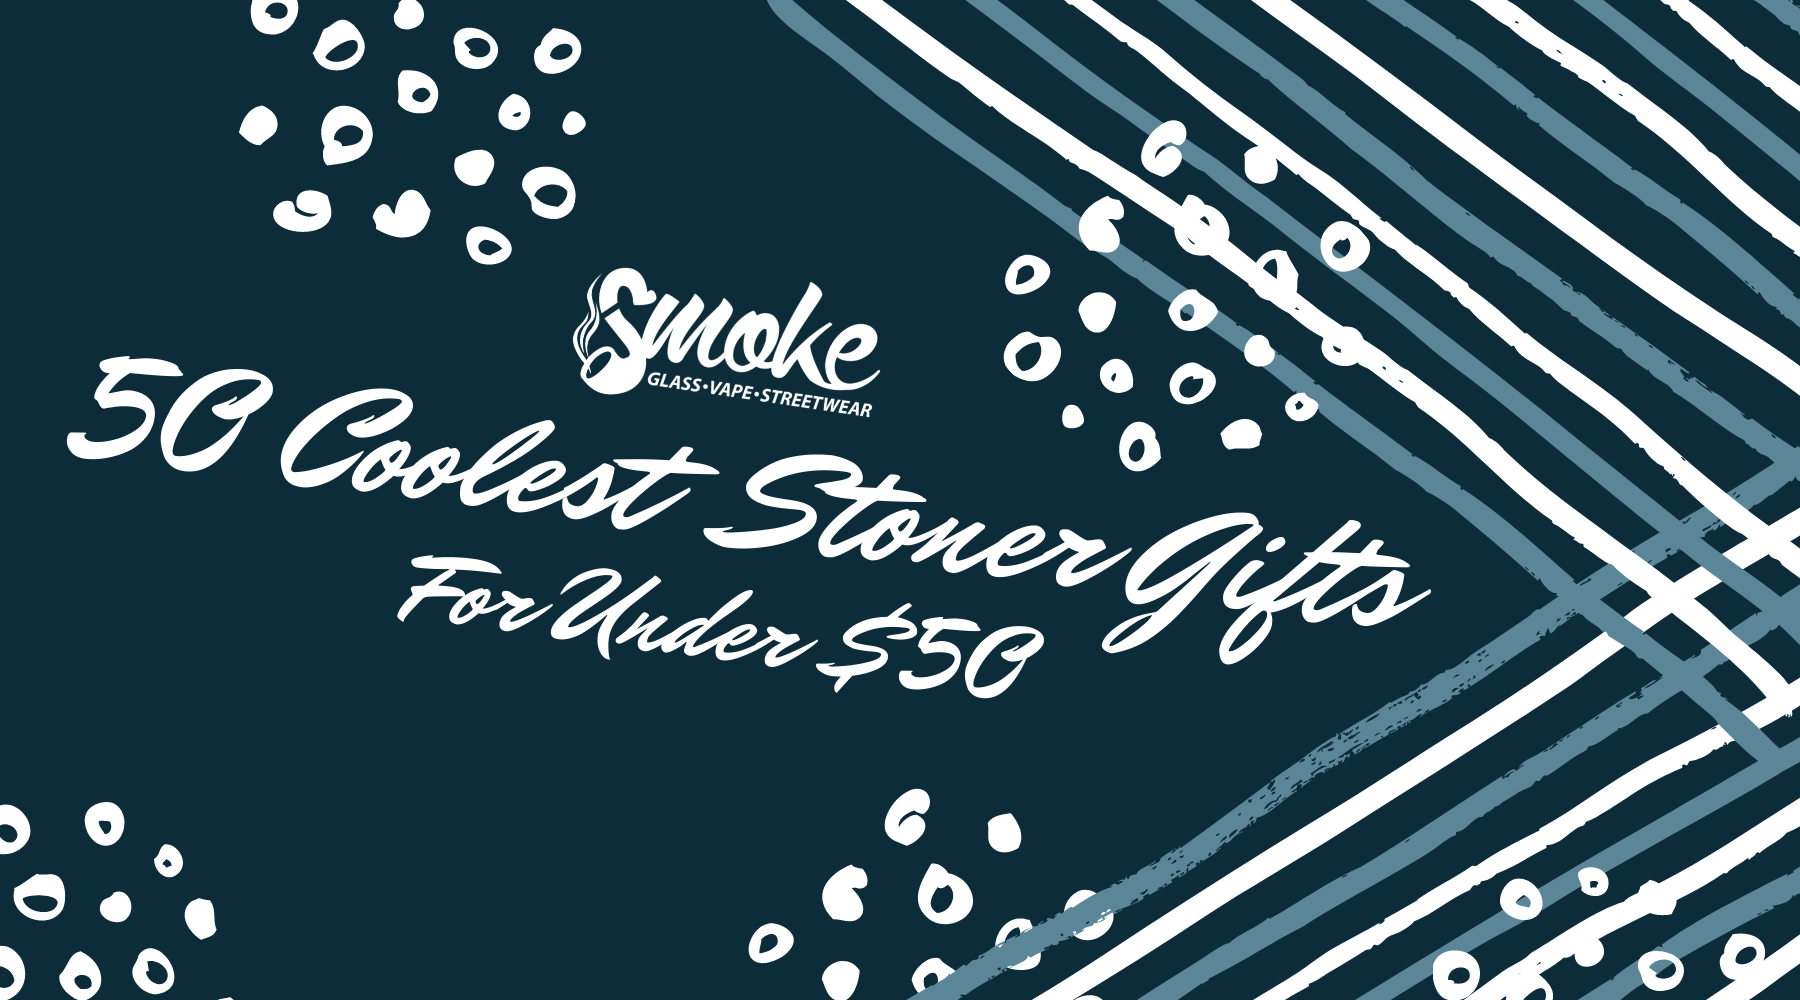 50 Coolest Stoner Gifts For Under $50